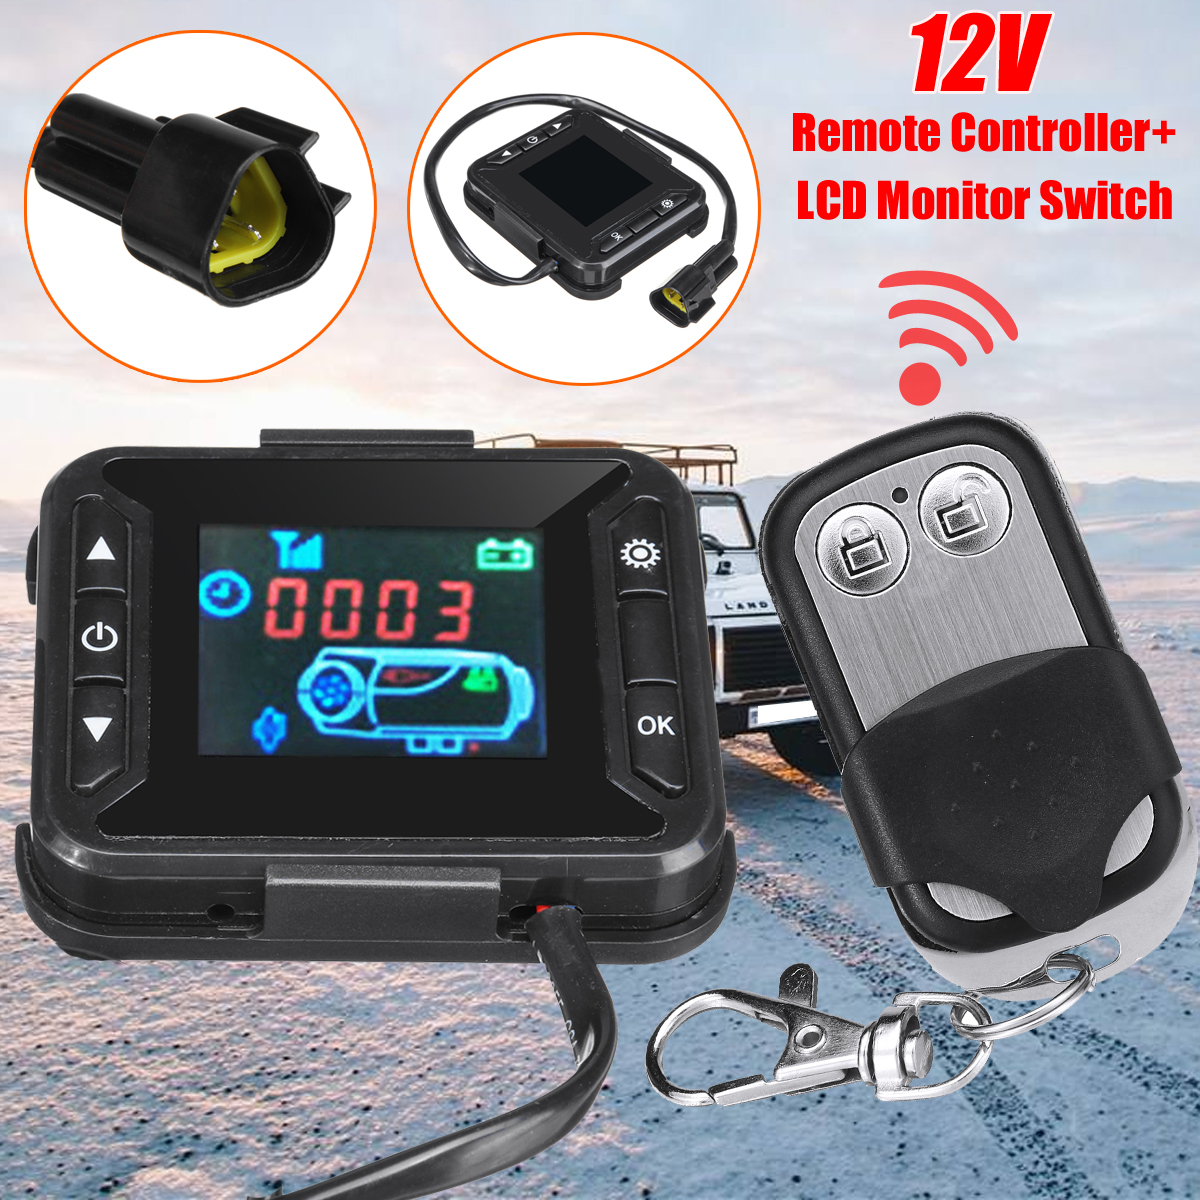 12V-LCD-Monitor-Switch--Remote-Control-For-Auto-Truck-Air-Diesel-Heater-Controller-1416116-1